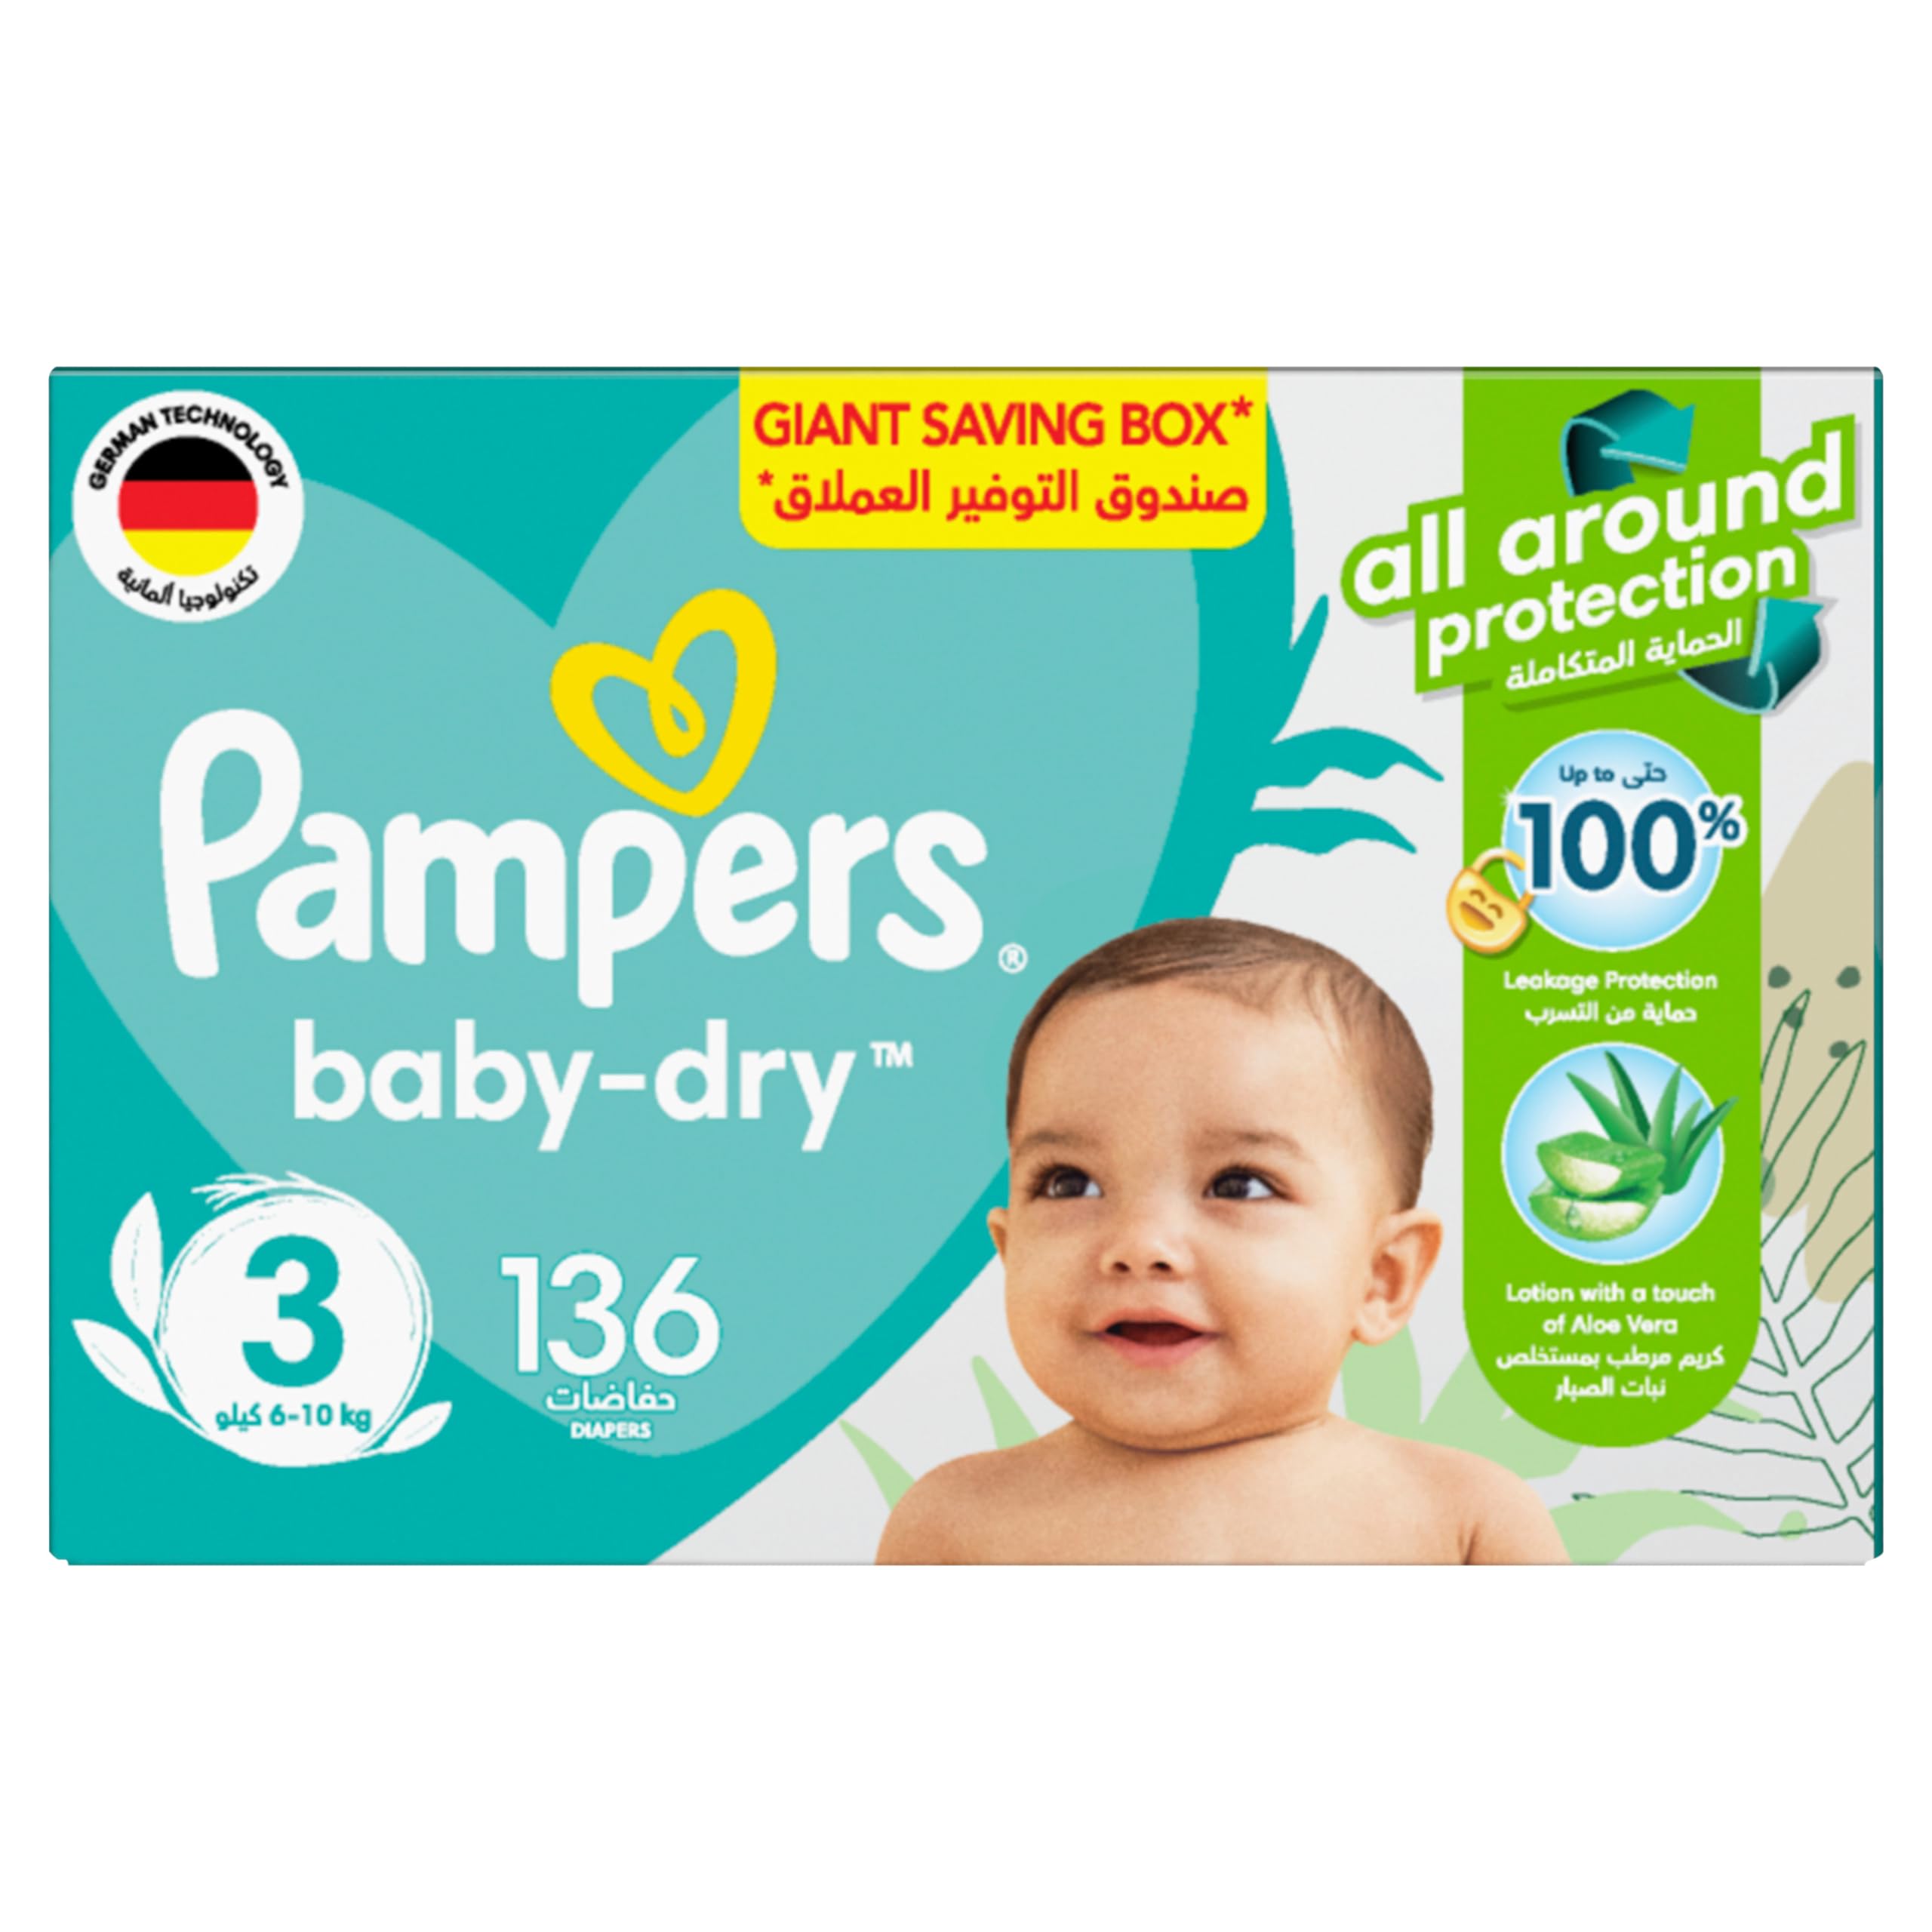 pampers giant box 4